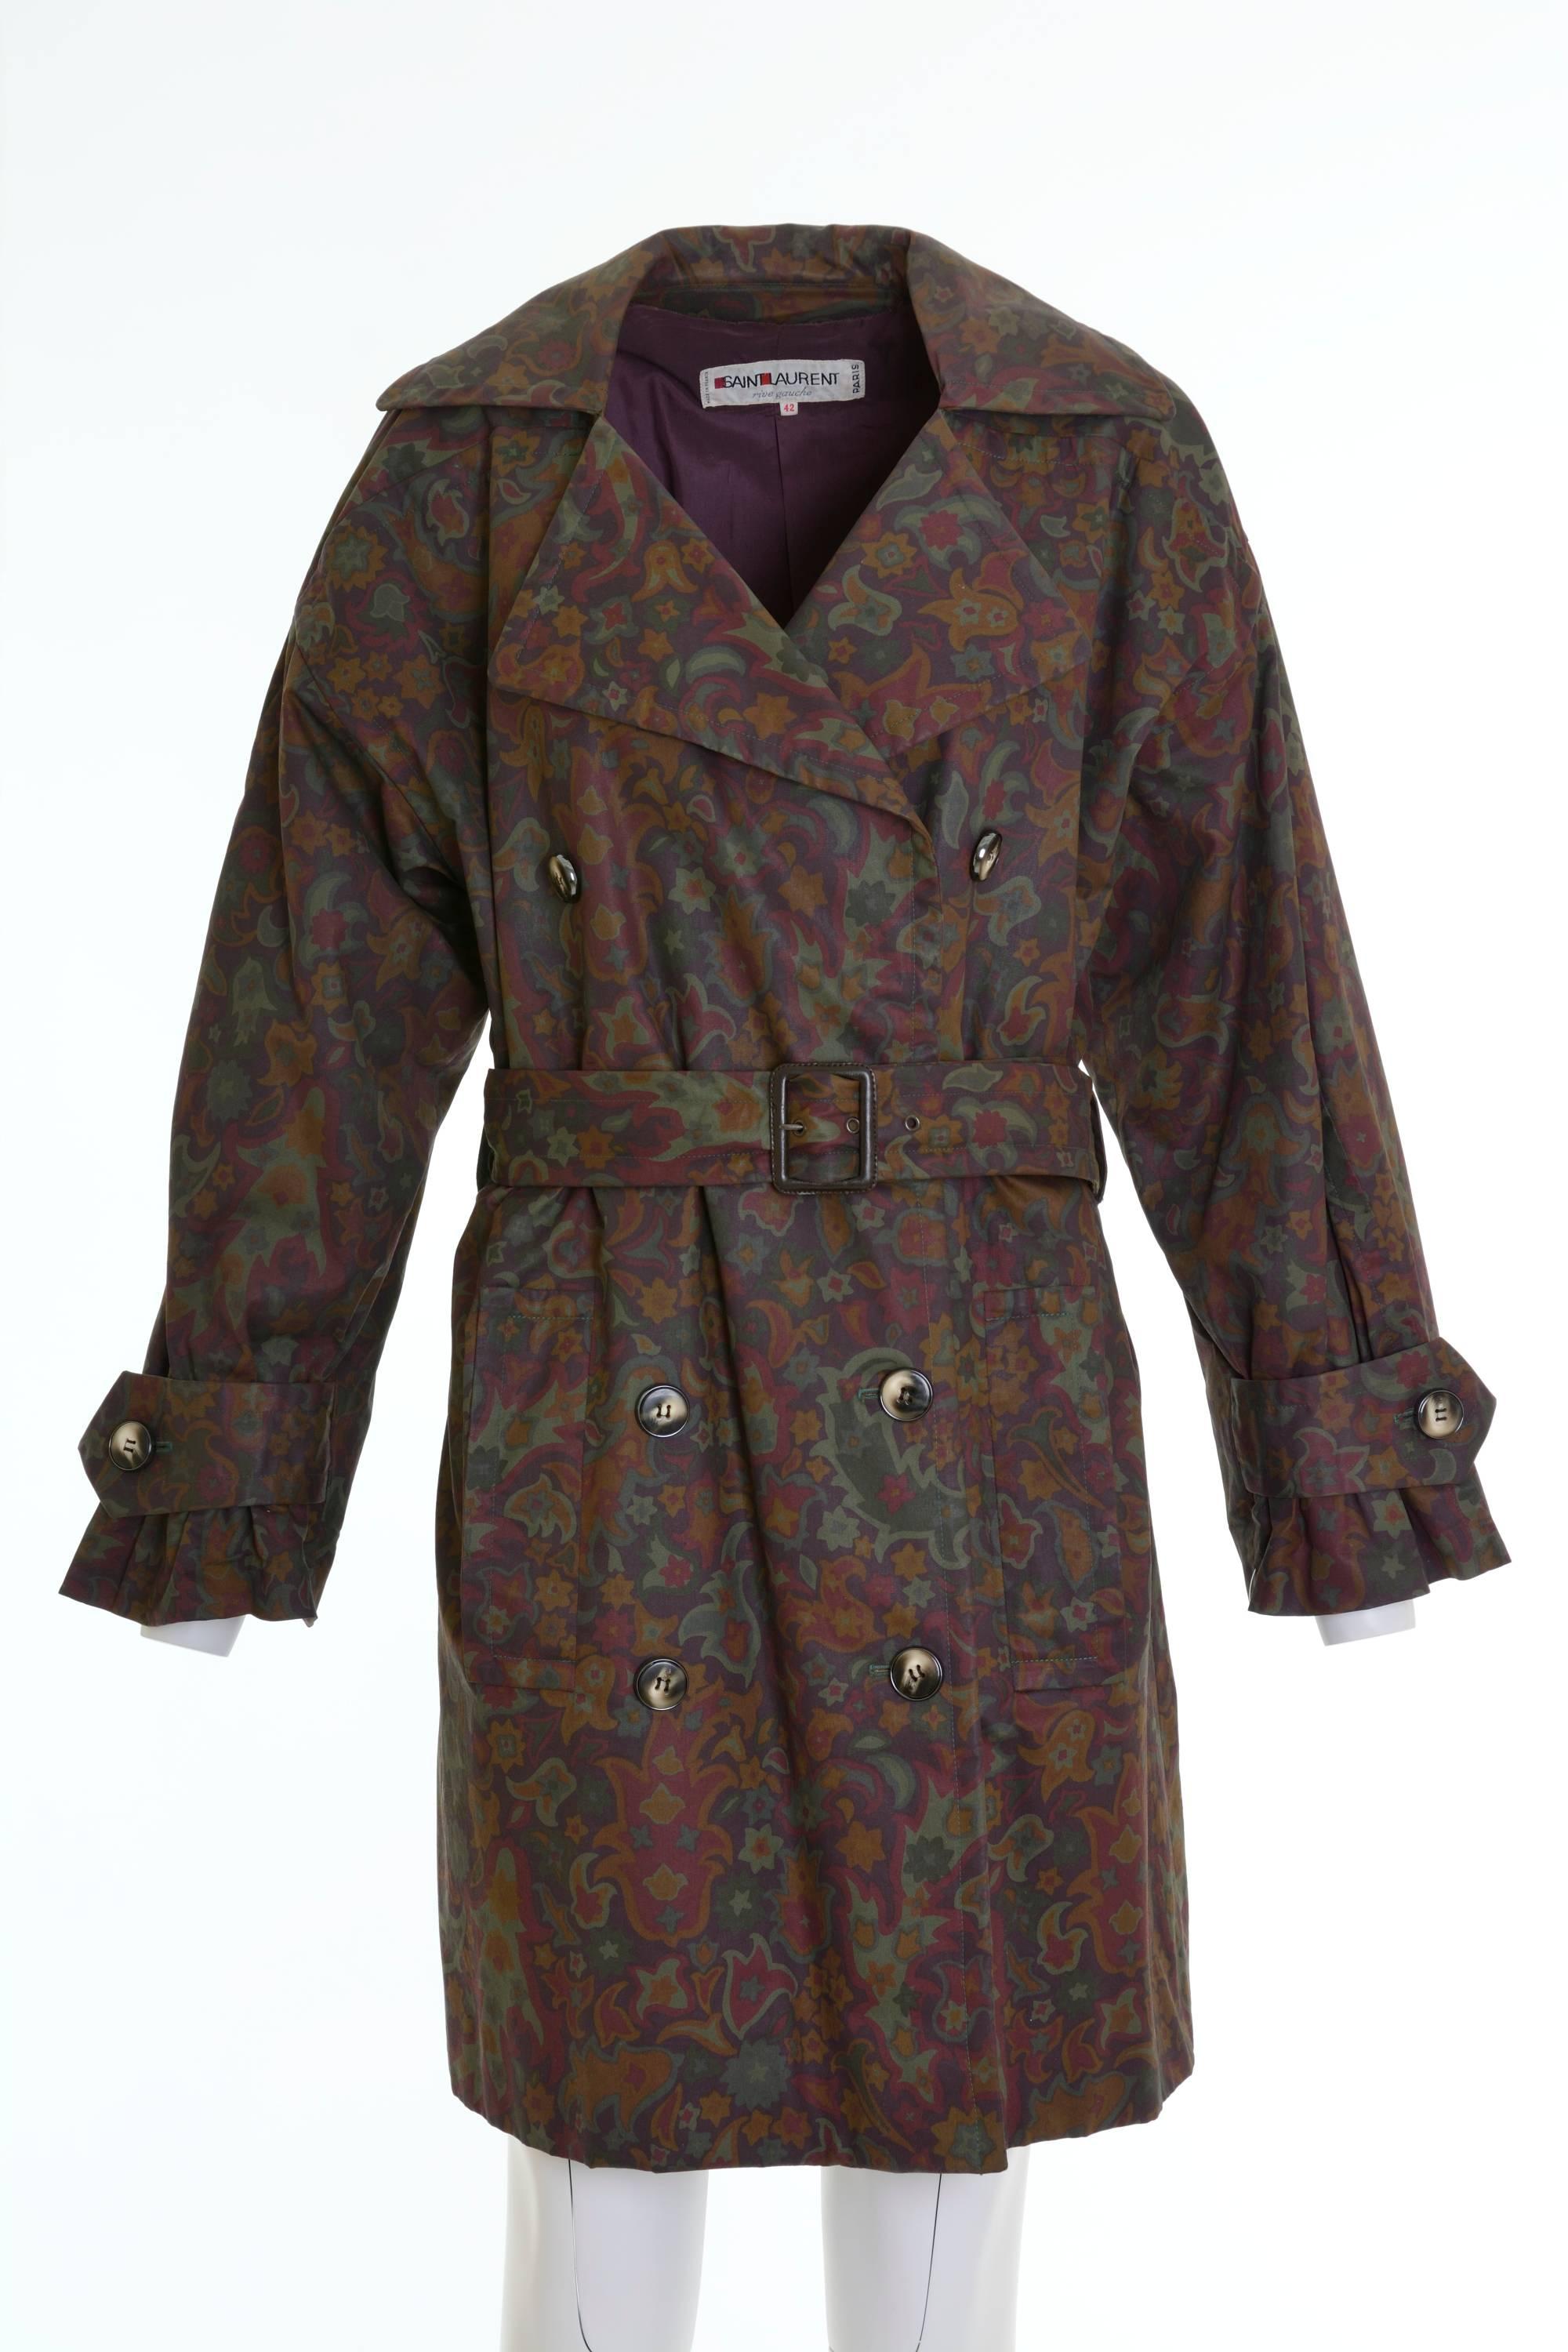 This lovely 1980s Yves Saint Laurent trench coat is in a purple and green floral print gabardine cotton waterproof fabric. It's oversize and has metal buttons, two side pockets and is purple satin lined. It's included the belt. 

Good vintage